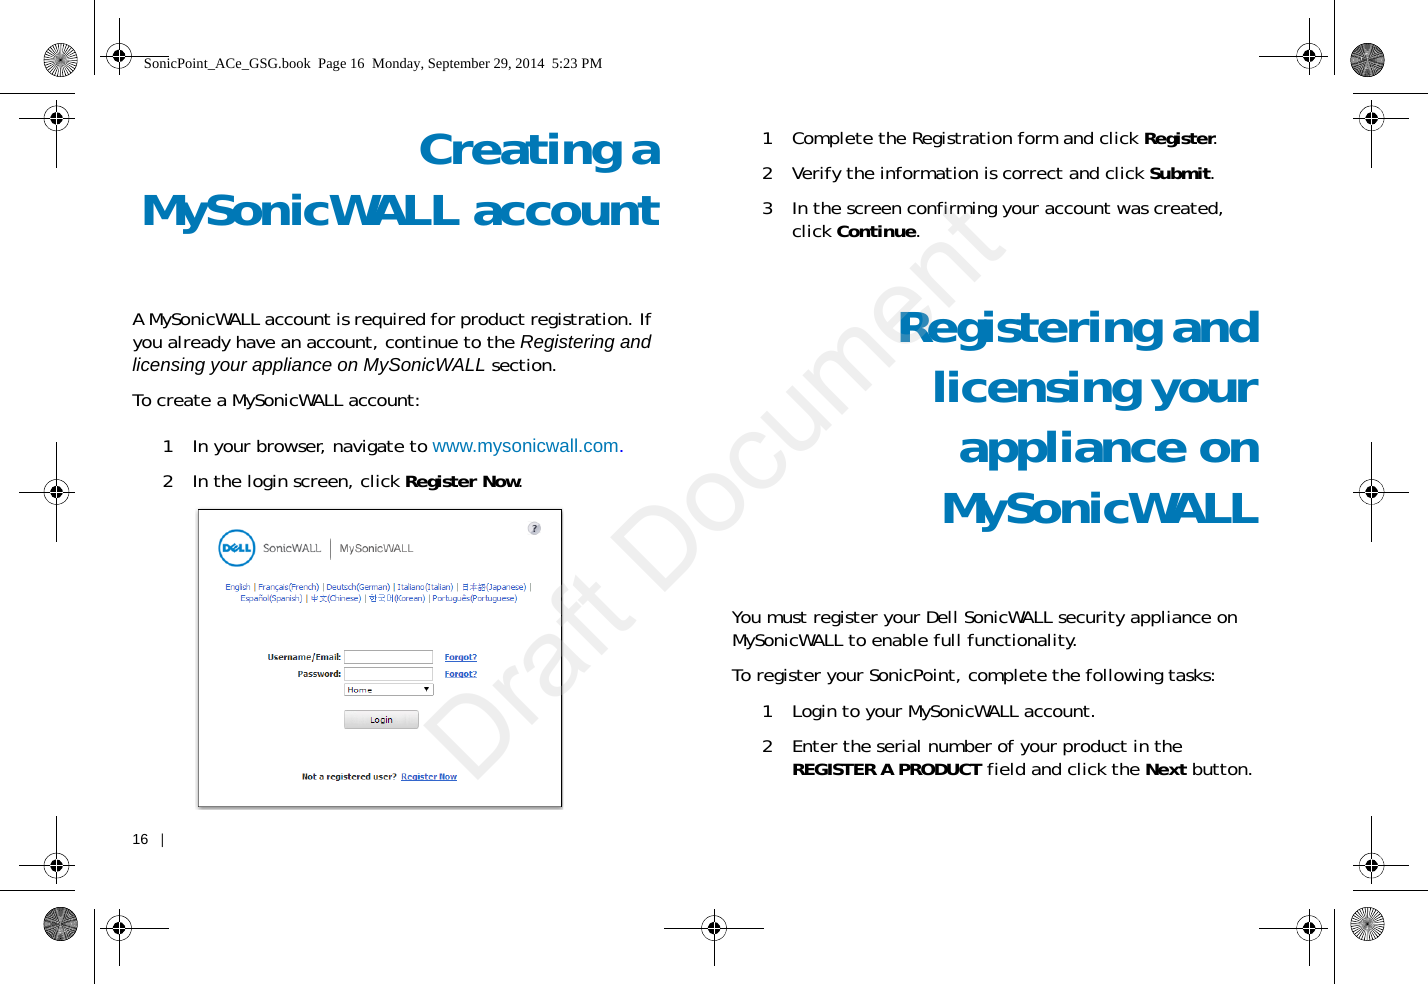 16   |   Creating aMySonicWALL accountA MySonicWALL account is required for product registration. If you already have an account, continue to the Registering and licensing your appliance on MySonicWALL section.To create a MySonicWALL account:1 In your browser, navigate to www.mysonicwall.com.2 In the login screen, click Register Now.1 Complete the Registration form and click Register.2 Verify the information is correct and click Submit.3 In the screen confirming your account was created, click Continue.Registering andlicensing yourappliance onMySonicWALLYou must register your Dell SonicWALL security appliance on MySonicWALL to enable full functionality. To register your SonicPoint, complete the following tasks:1 Login to your MySonicWALL account. 2 Enter the serial number of your product in the REGISTER A PRODUCT field and click the Next button.SonicPoint_ACe_GSG.book  Page 16  Monday, September 29, 2014  5:23 PMDraft Document